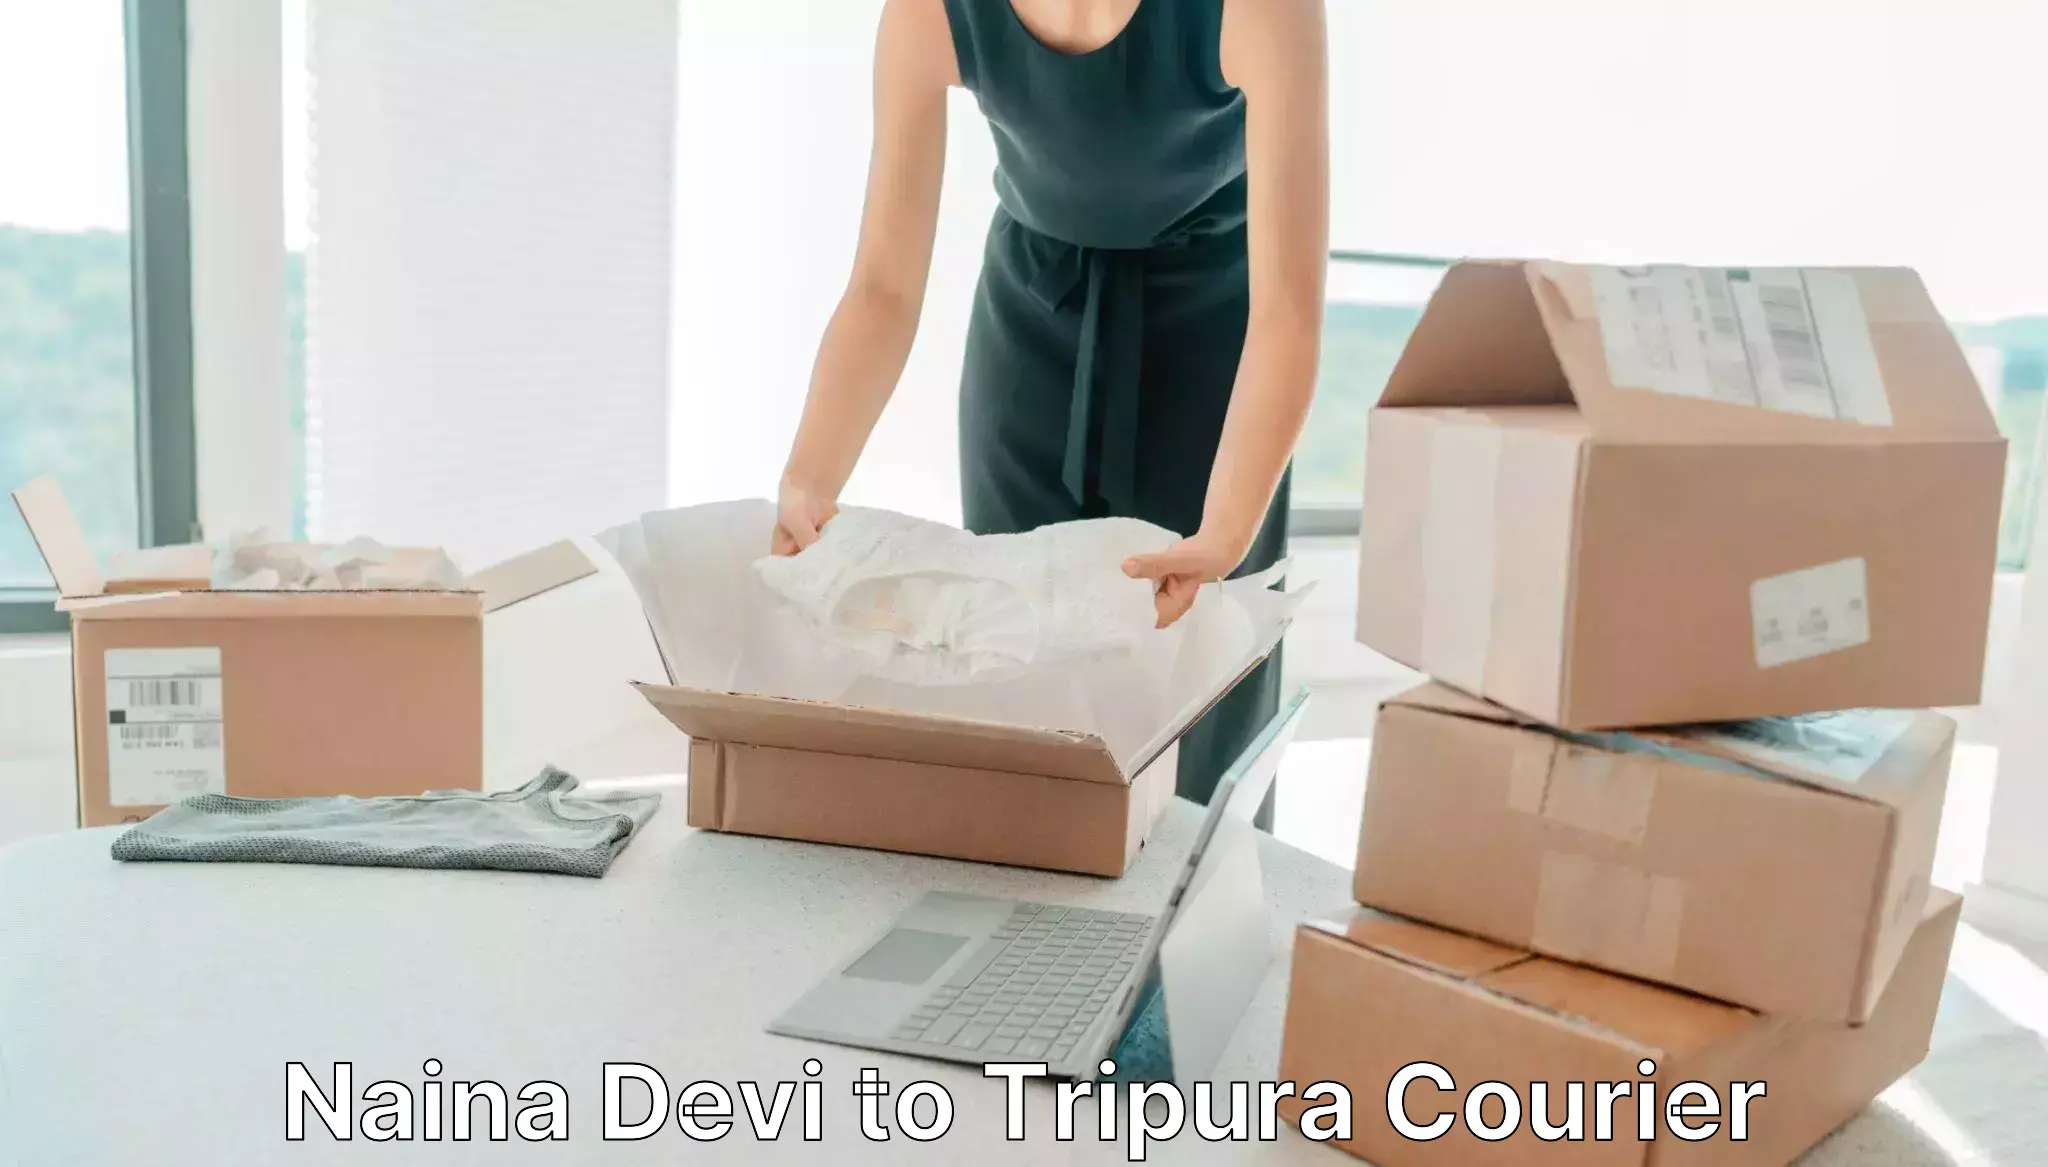 Flexible delivery scheduling Naina Devi to Udaipur Tripura